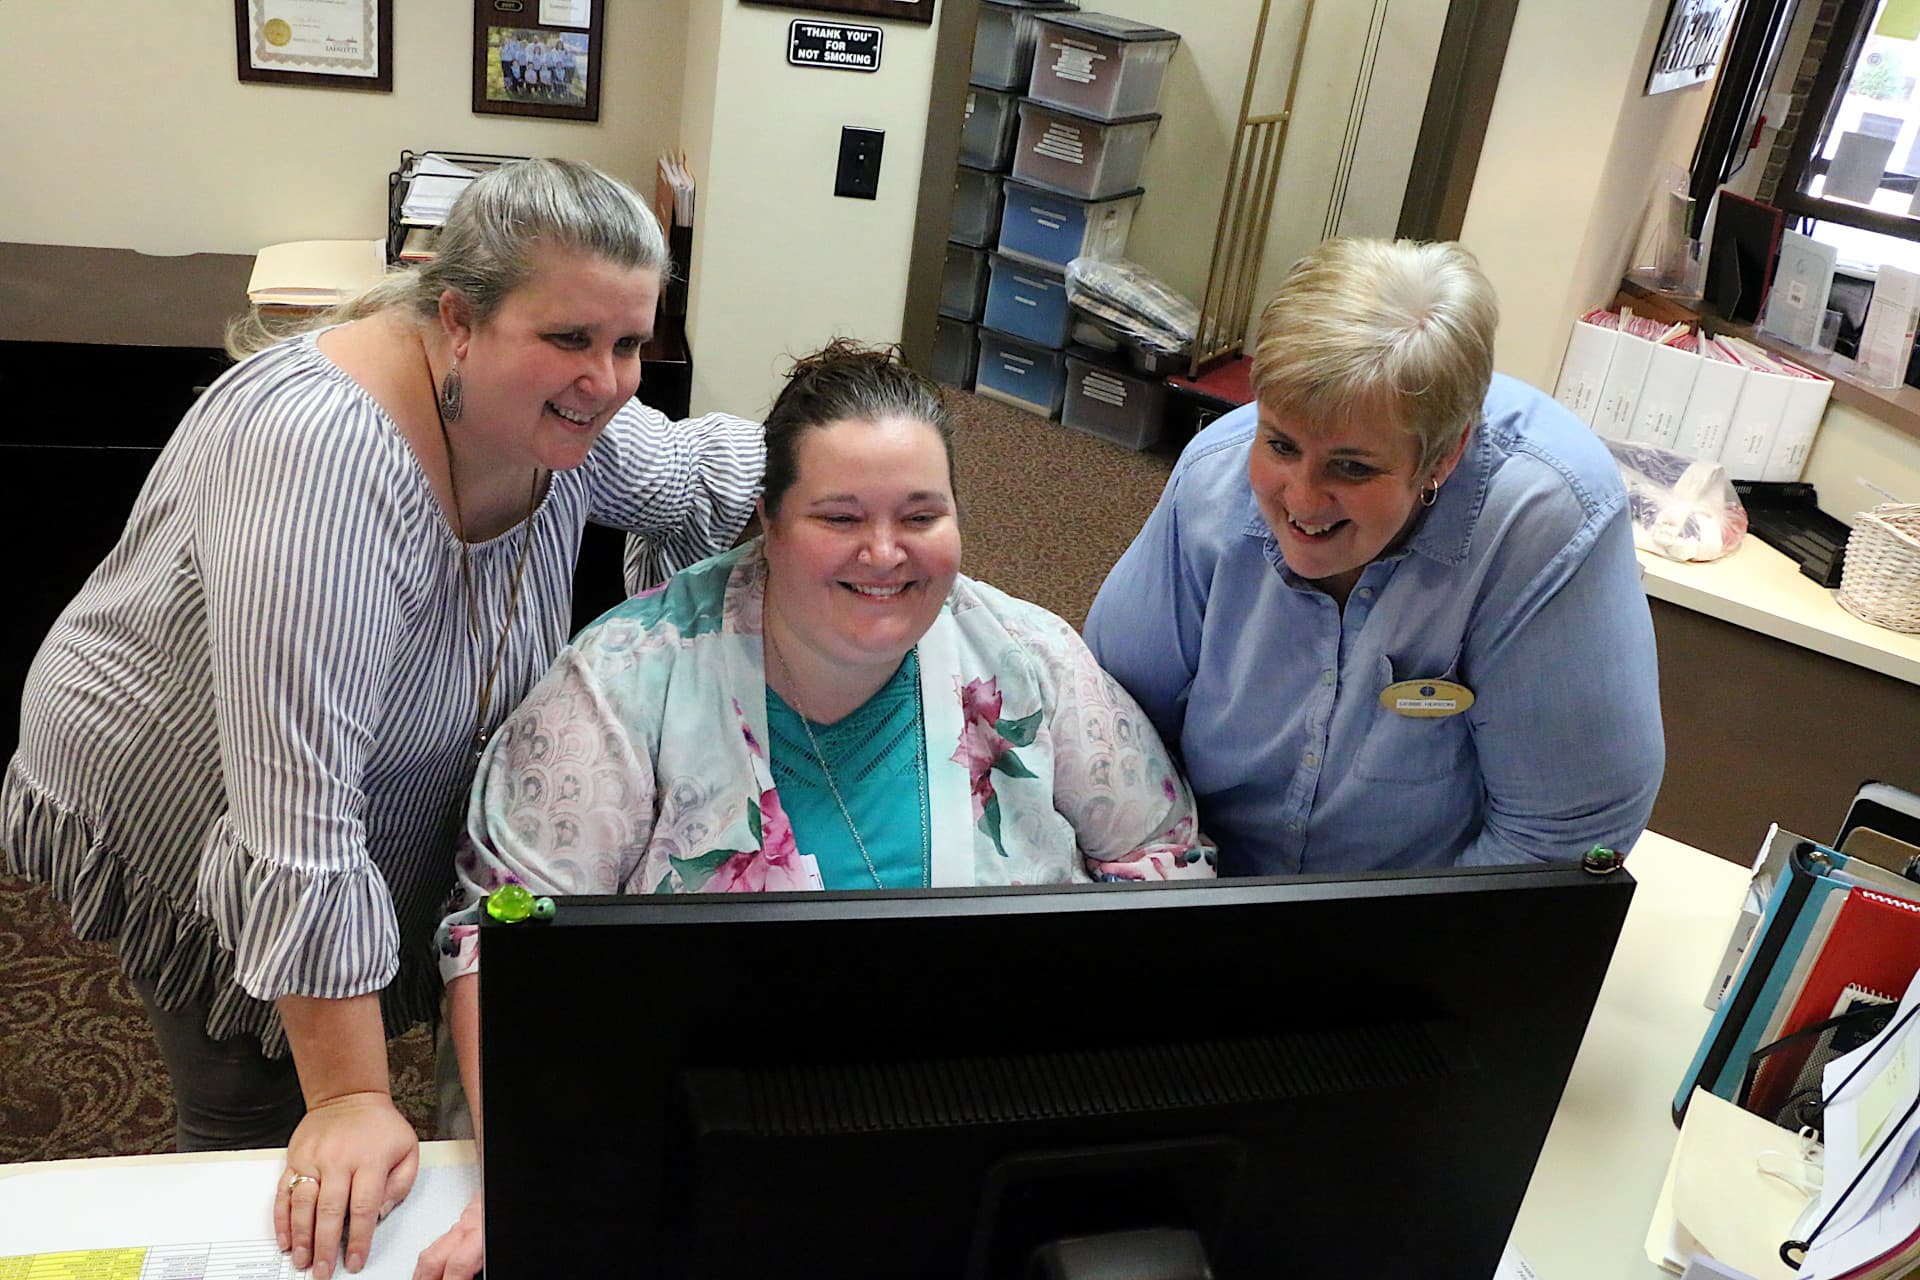 Three Saint Anthony employees laughing and chatting.